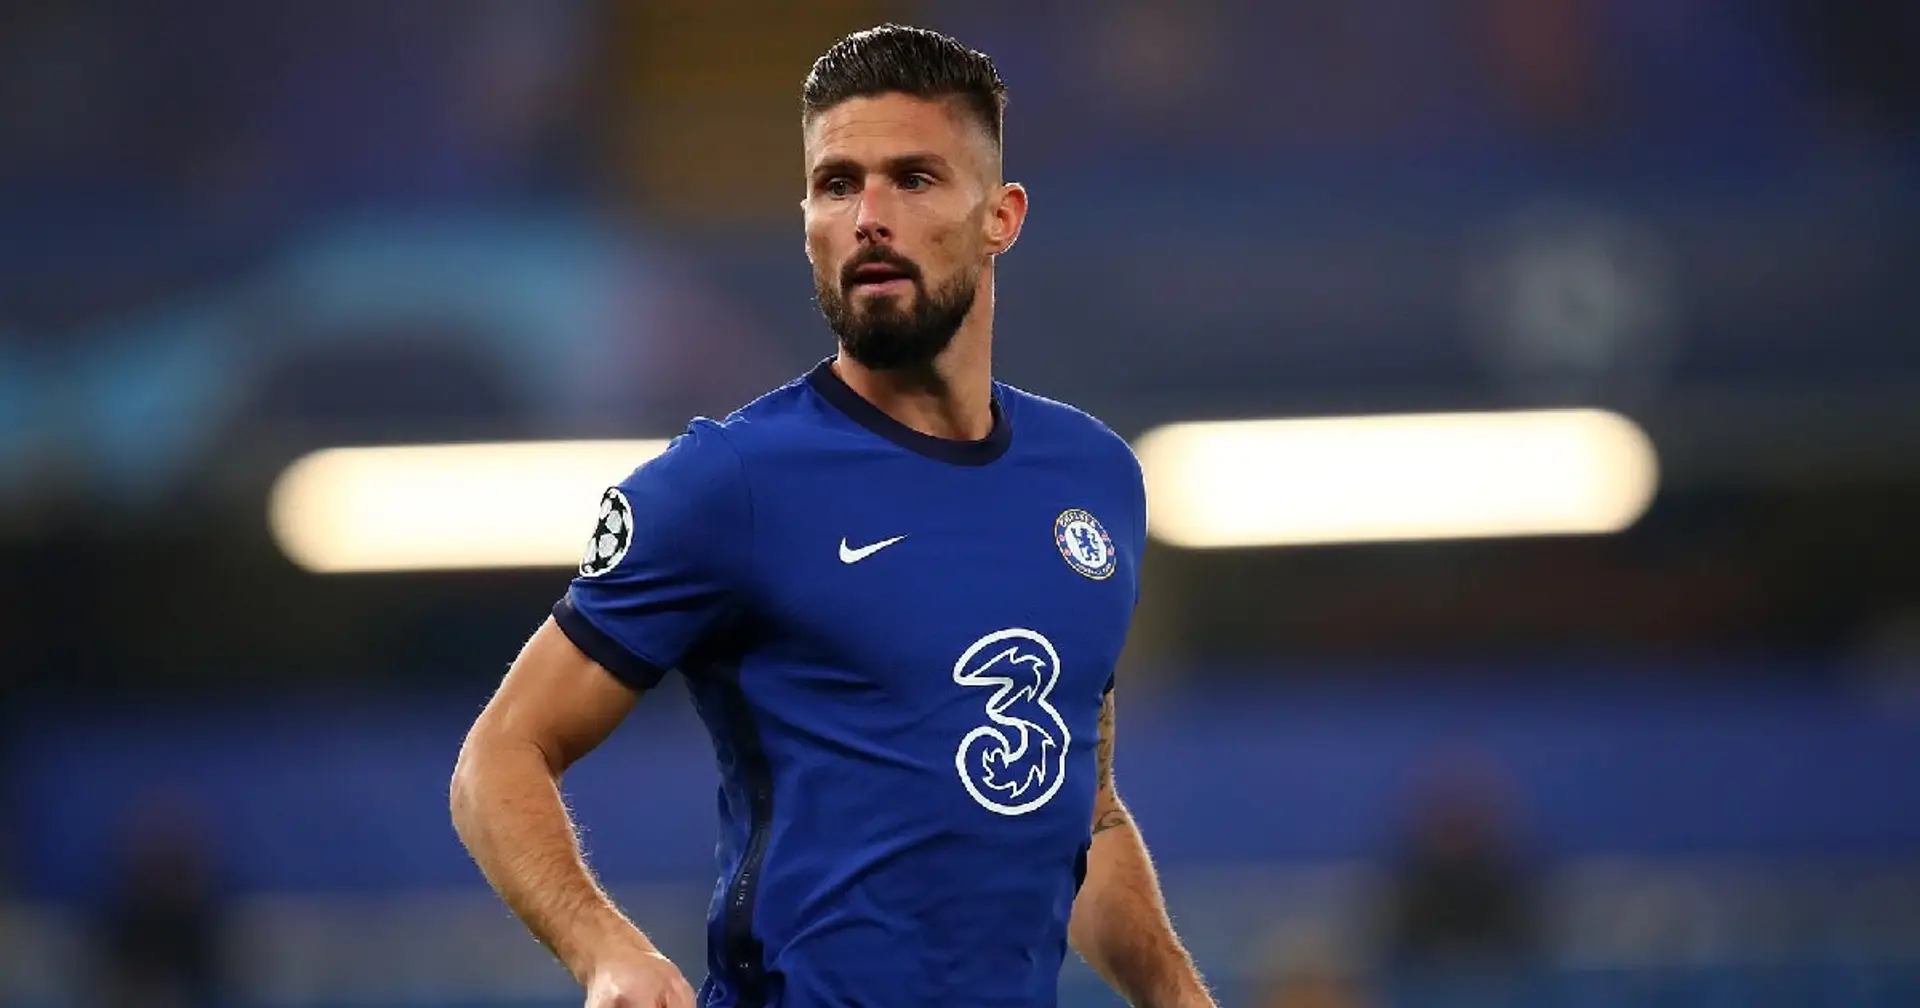 'They bring a lot': Giroud names Chelsea 2 players that show age is just a number